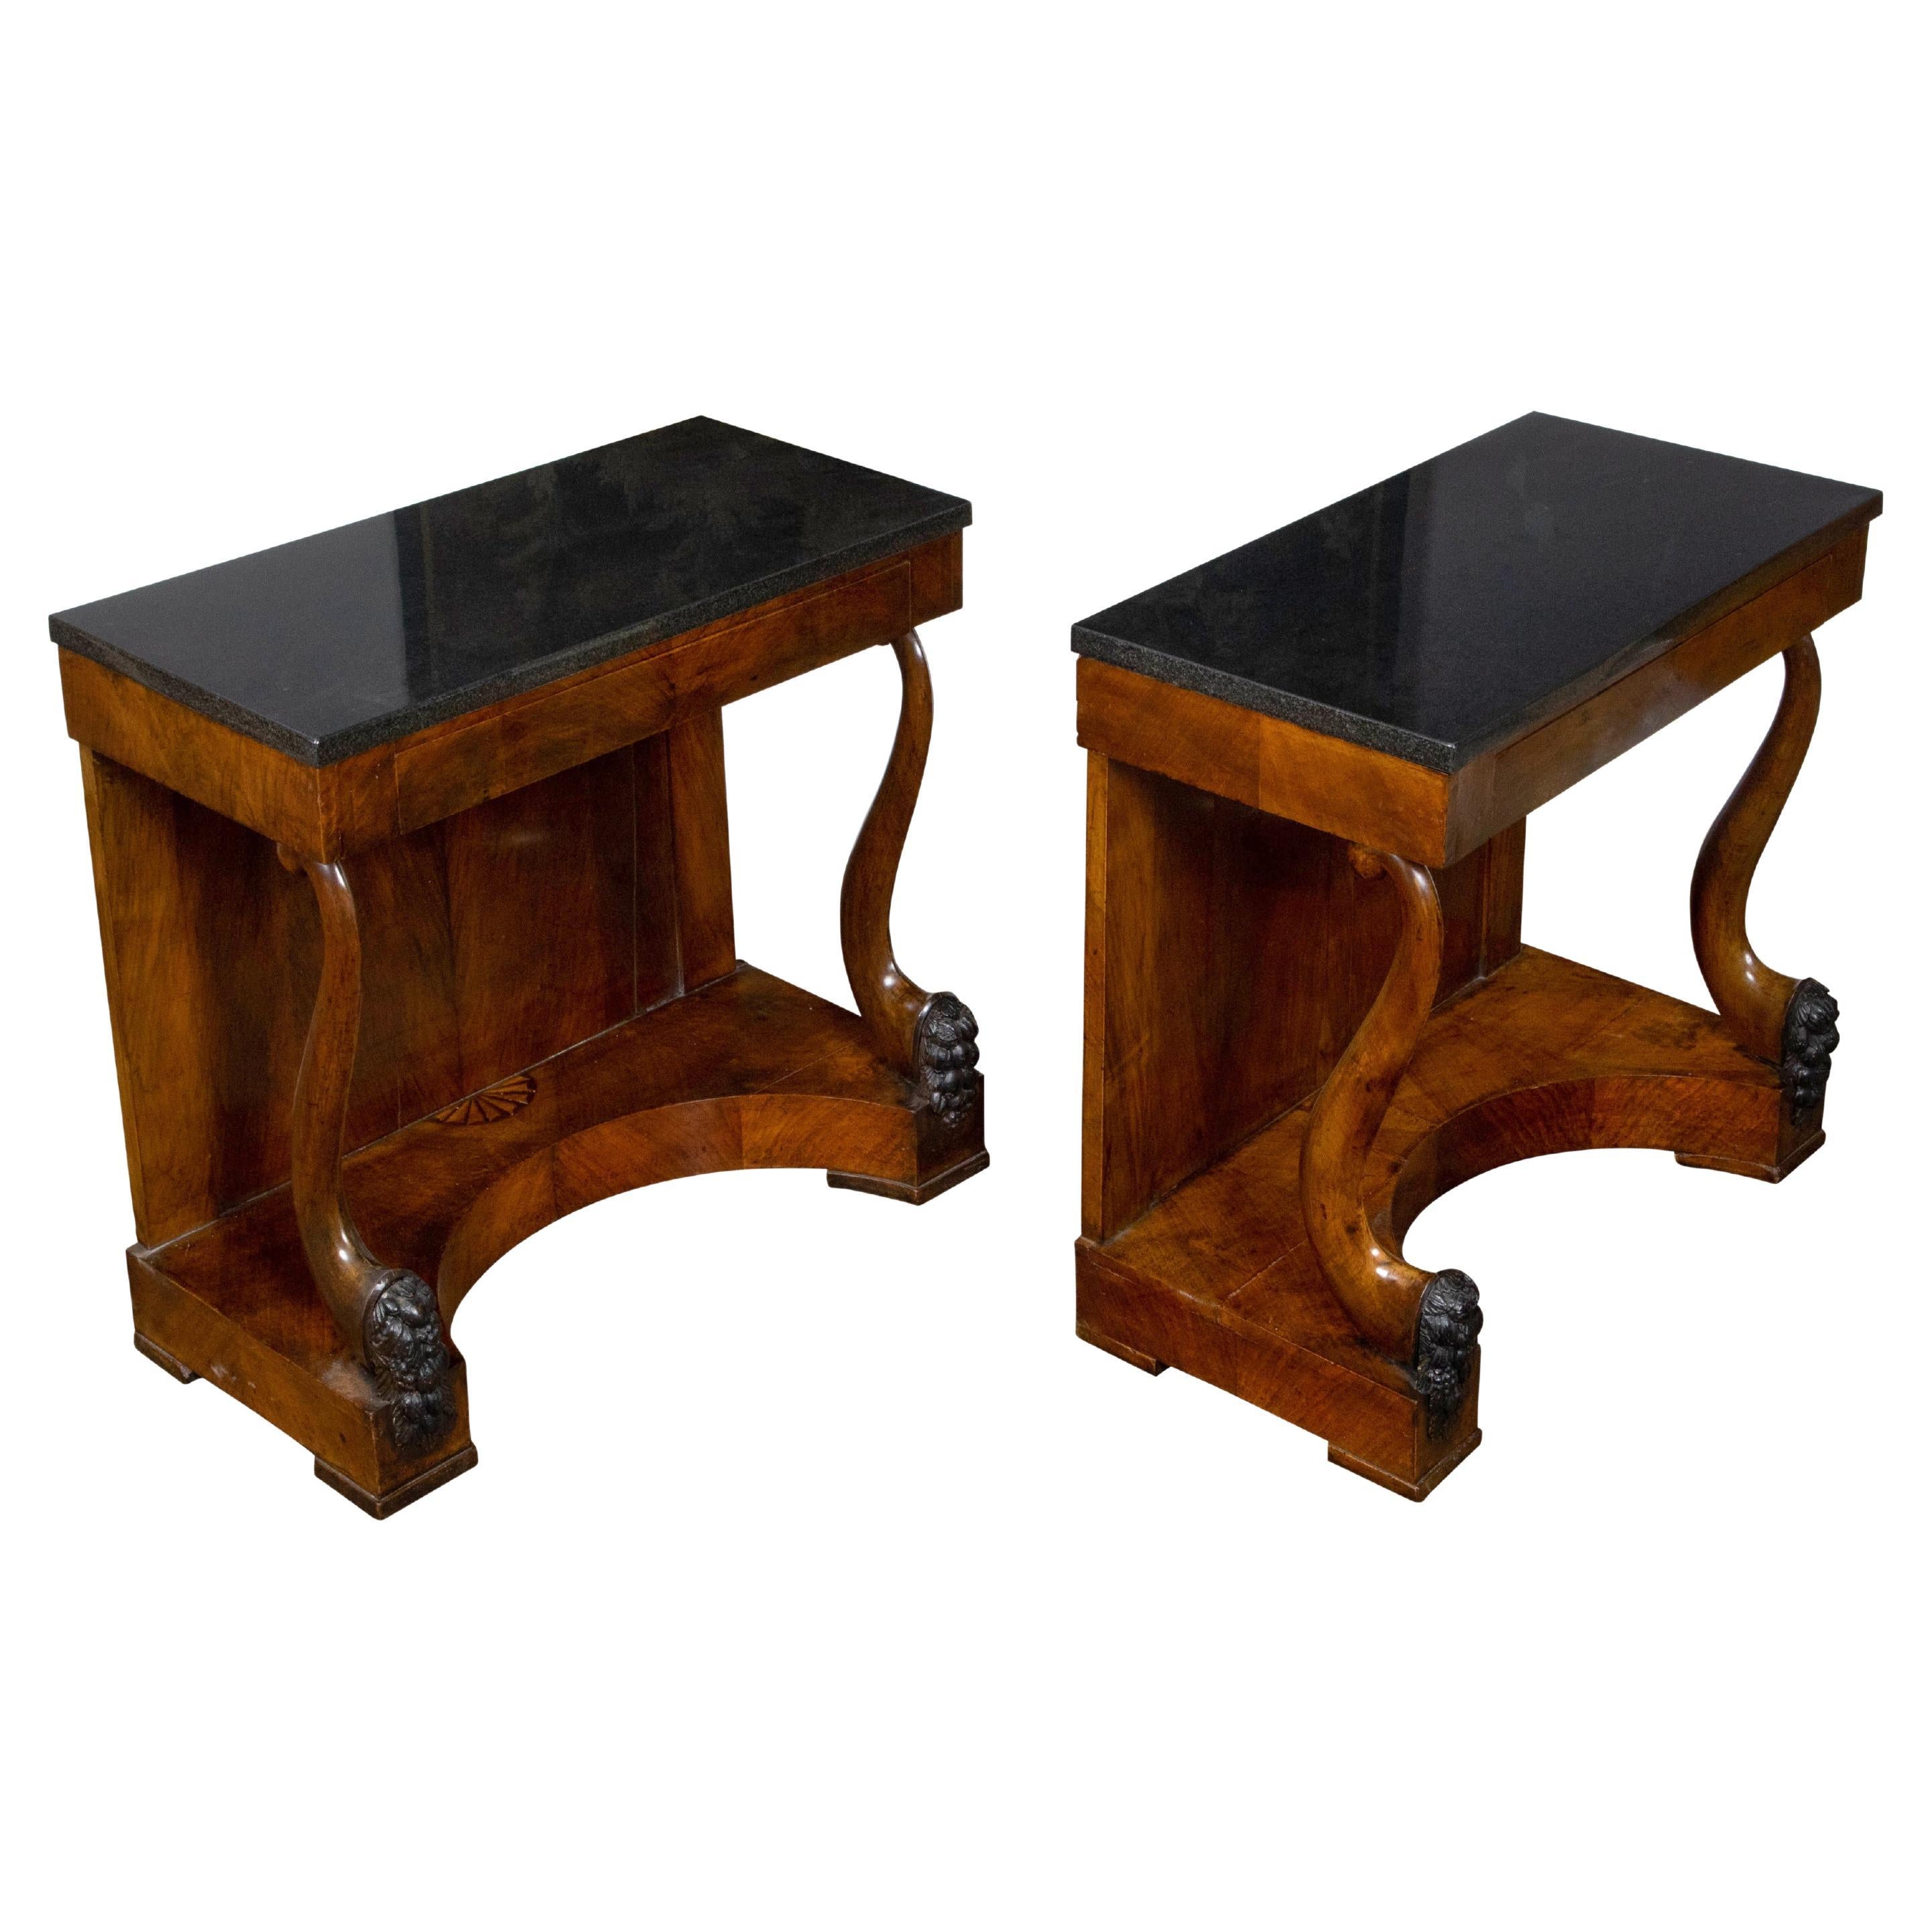 Pair of Austrian Biedermeier Period 19th Century Walnut and Marble Consoles For Sale